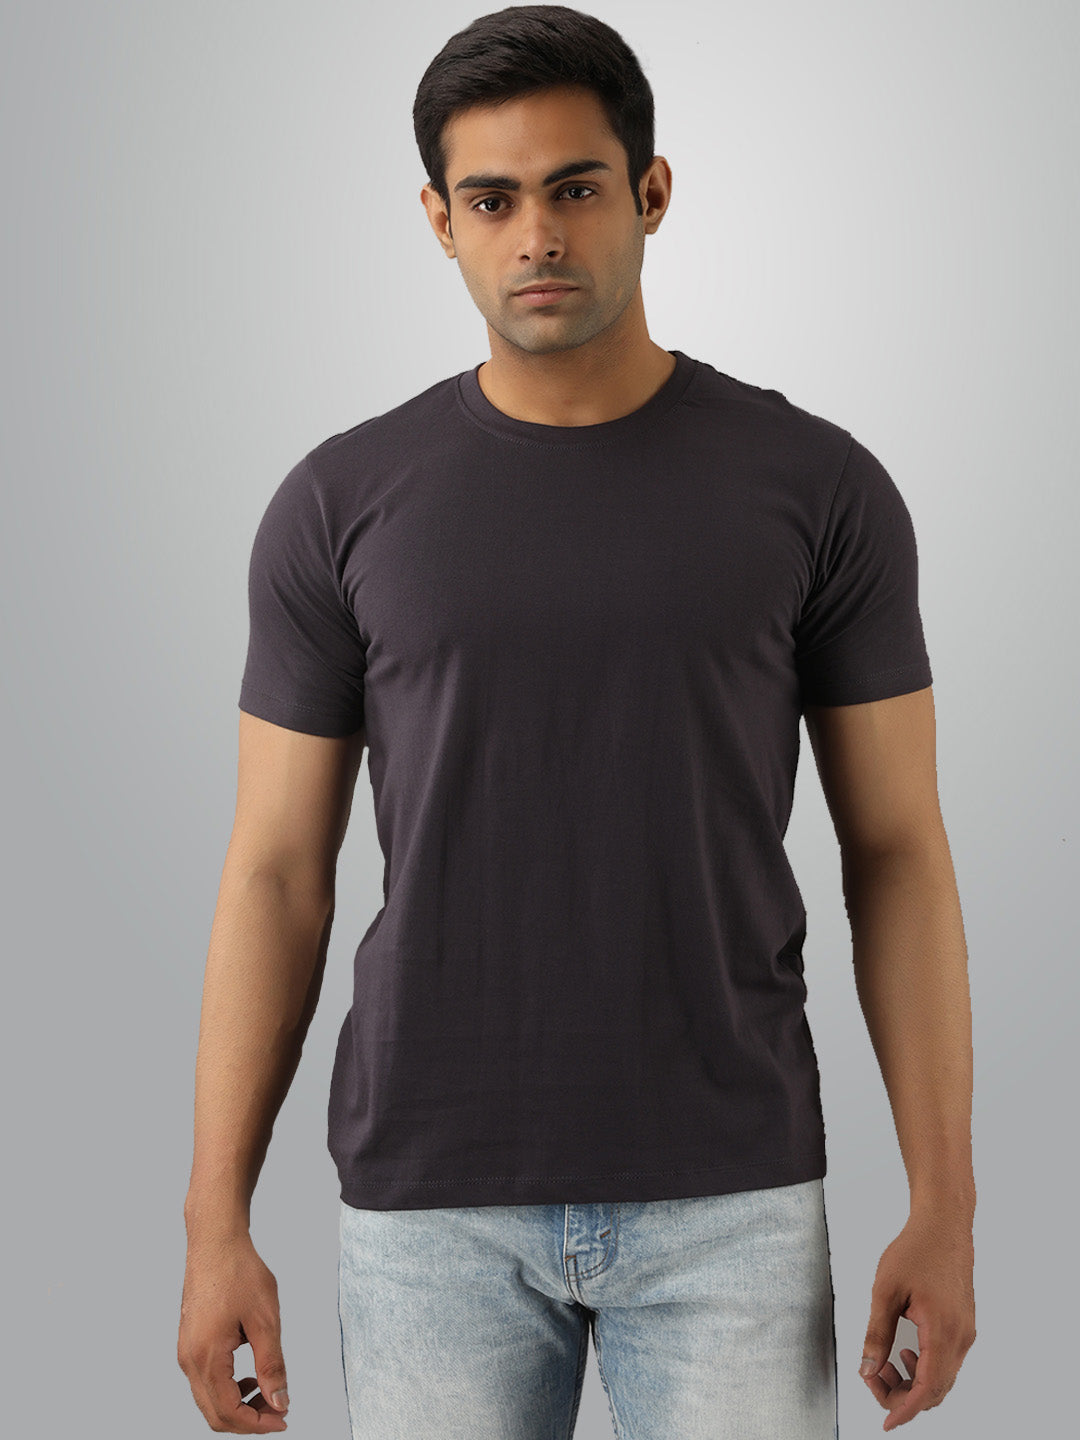 PLAIN HALF SLEEVES PACK OF TWO BLUE AND GREY T-SHIRTS